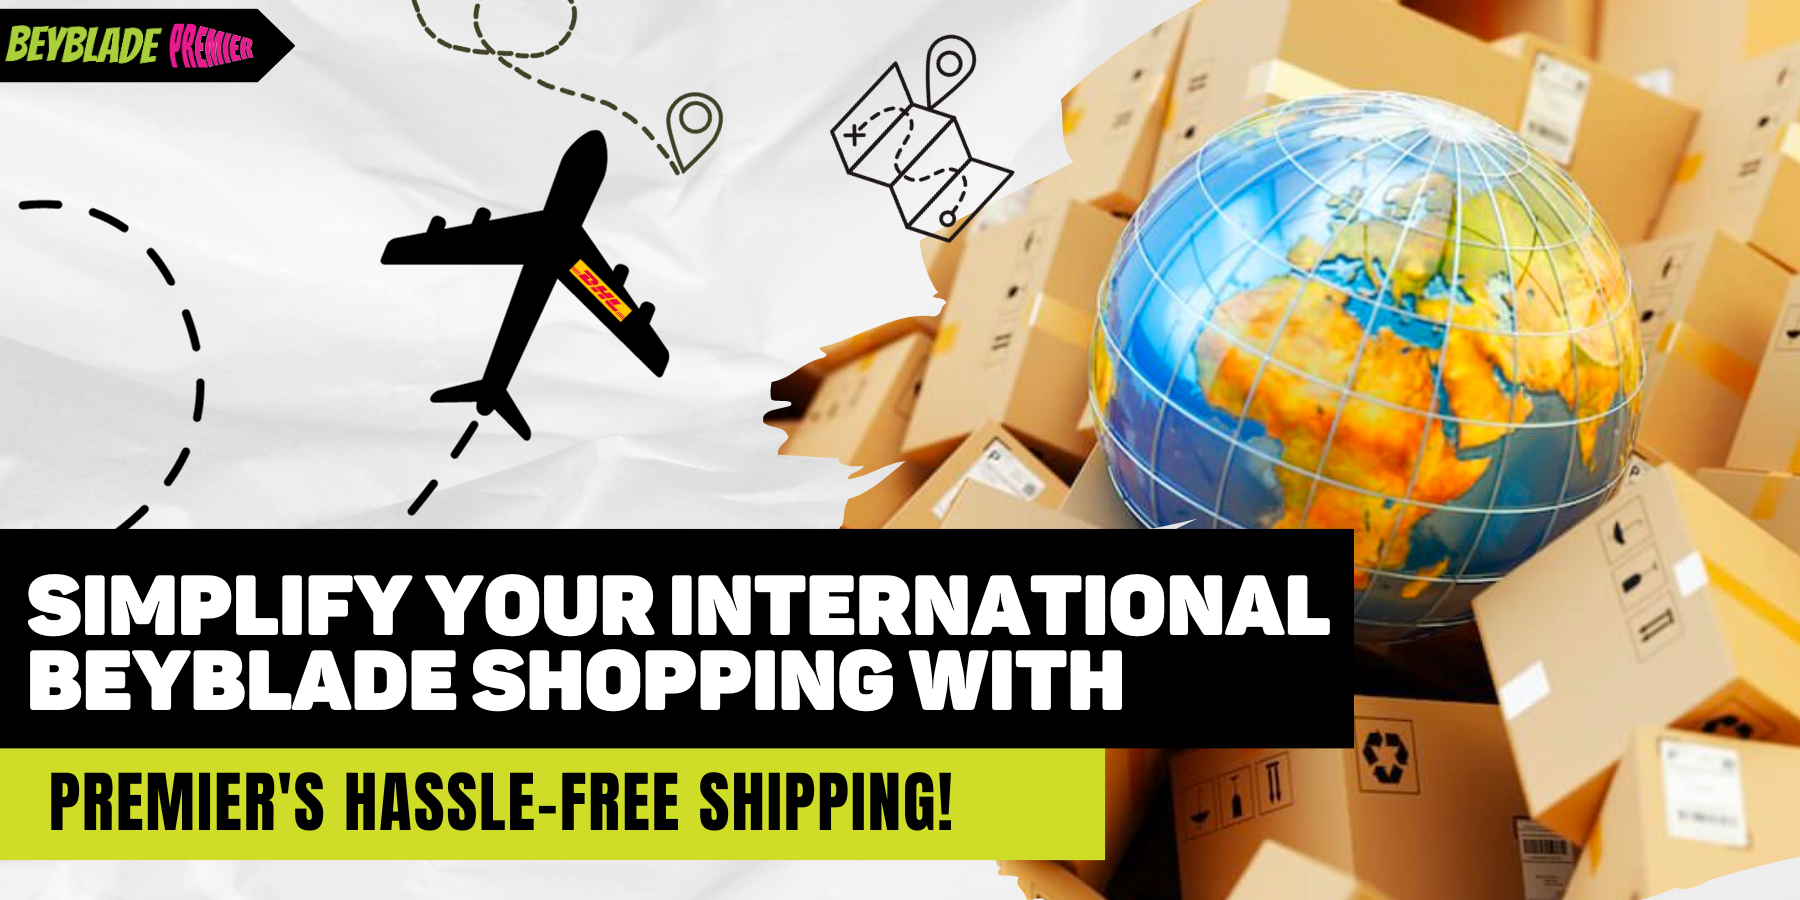 Simplify Your International Beyblade Shopping with Premier's Hassle-Free Shipping